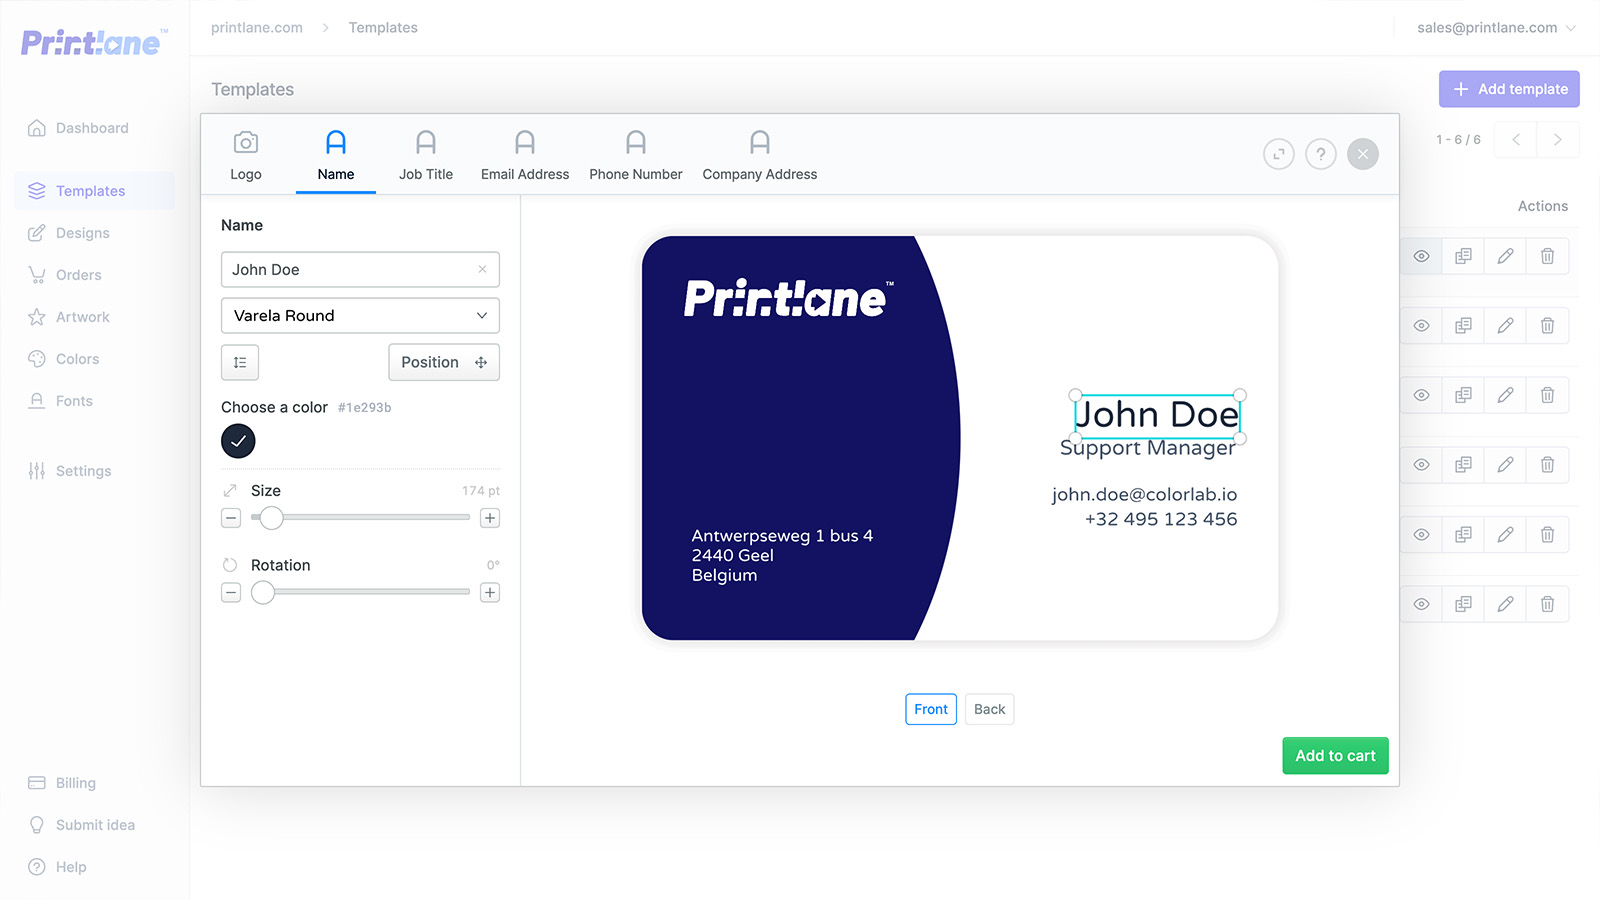 Integrate Printlane's intuitive and mobile-friendly product designer by using a plugin for popular e-commerce platforms like Shopify, Lightspeed, Wordpress WooCommerce, Magento or any other platform.